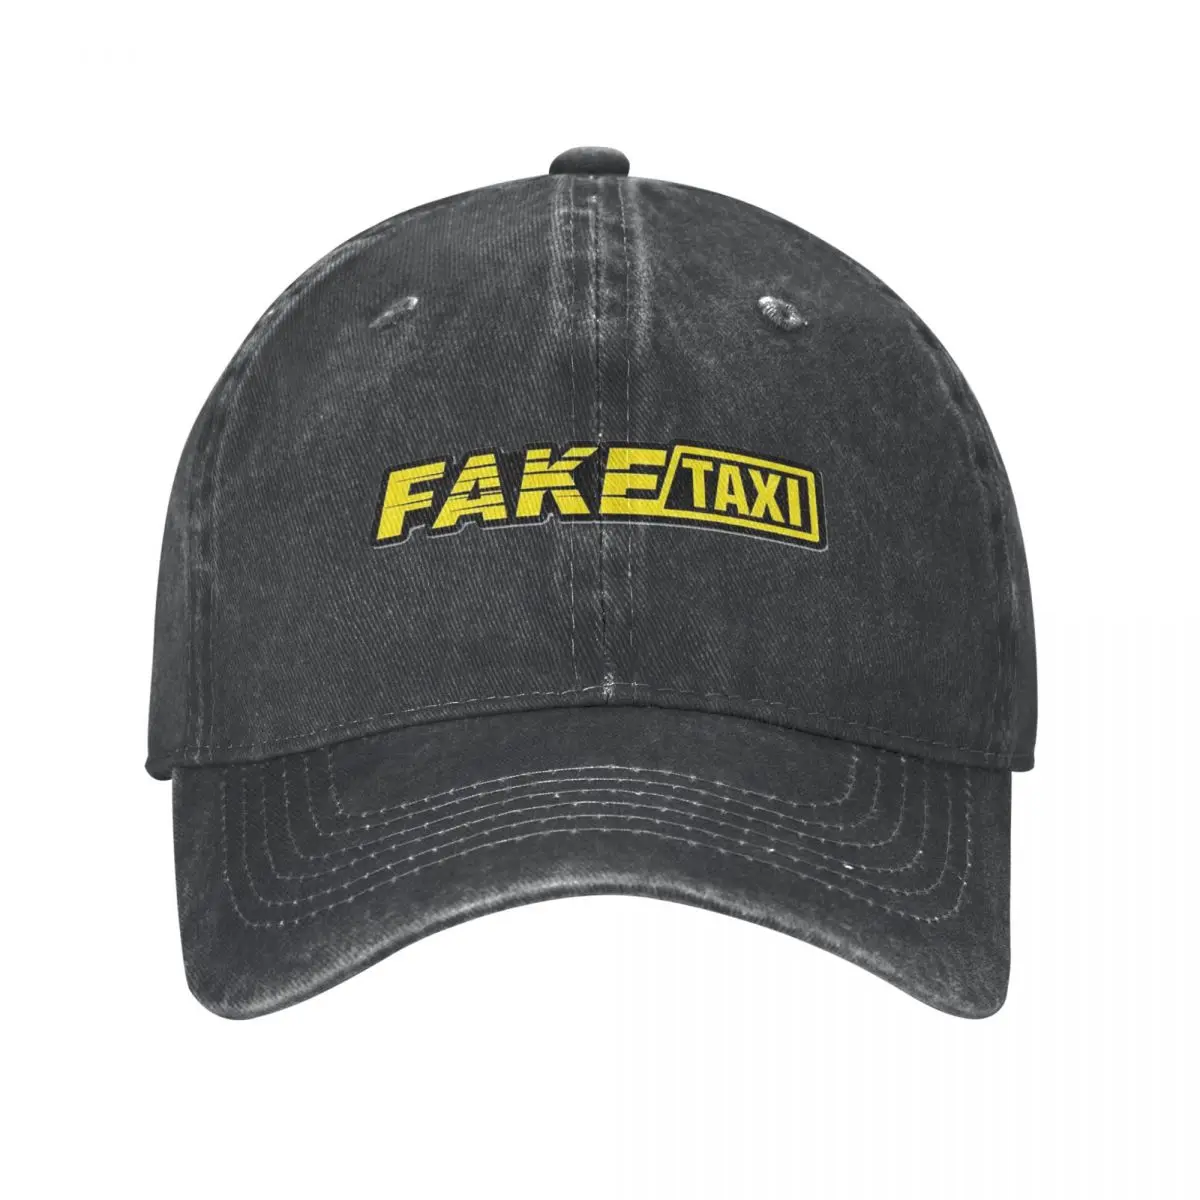 

Retro Fake Taxi Baseball Cap Vintage Distressed Washed Headwear Unisex Outdoor Workouts Unstructured Soft Caps Hat